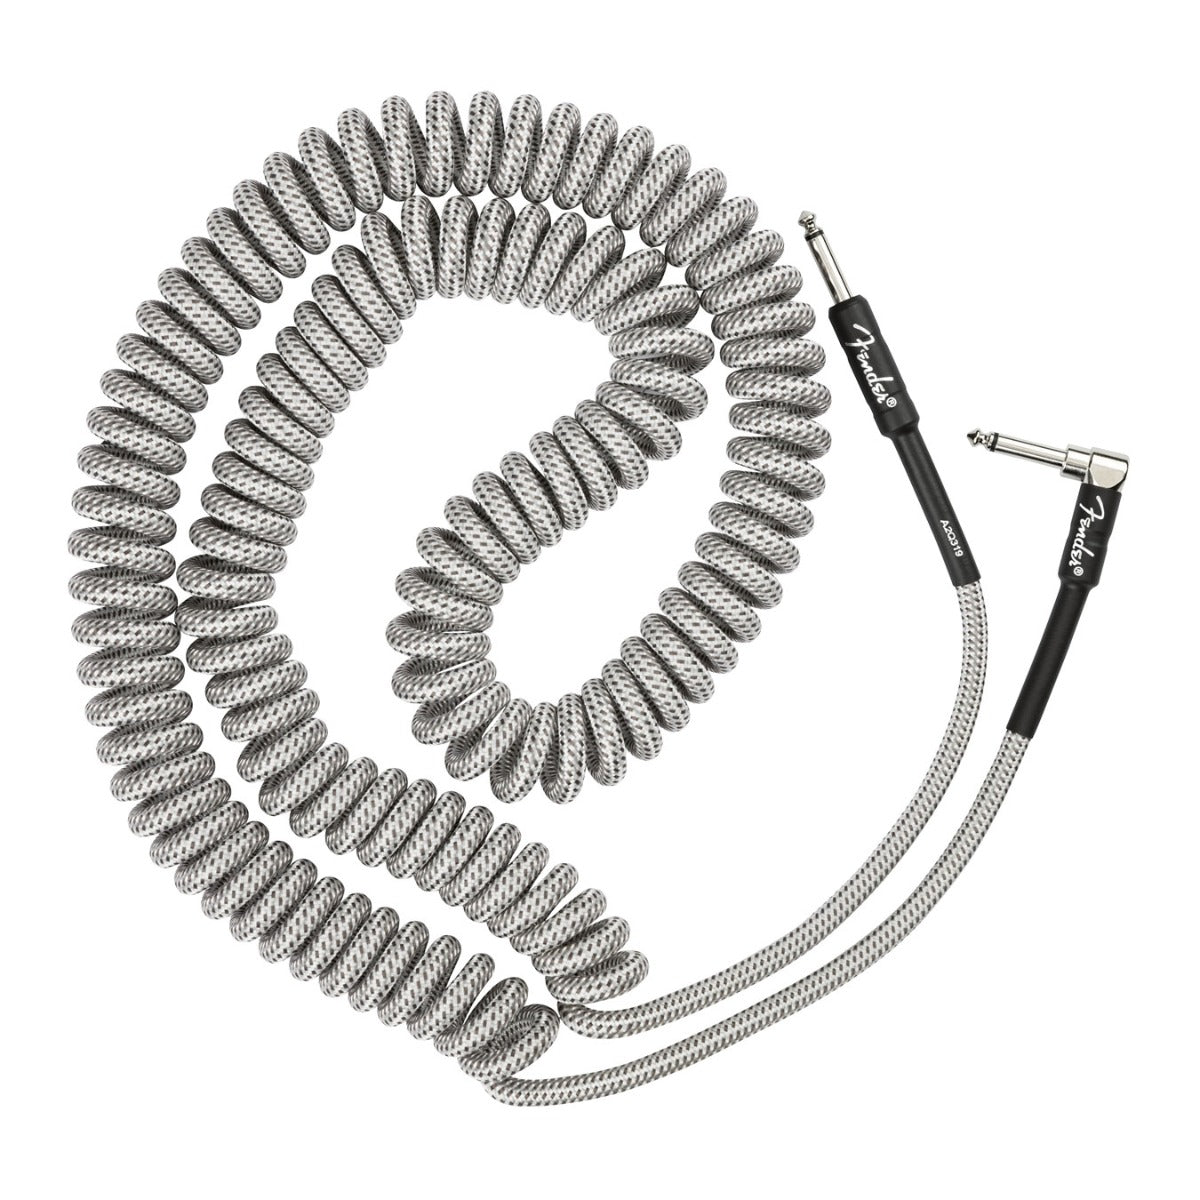 Top down image of the coil cable